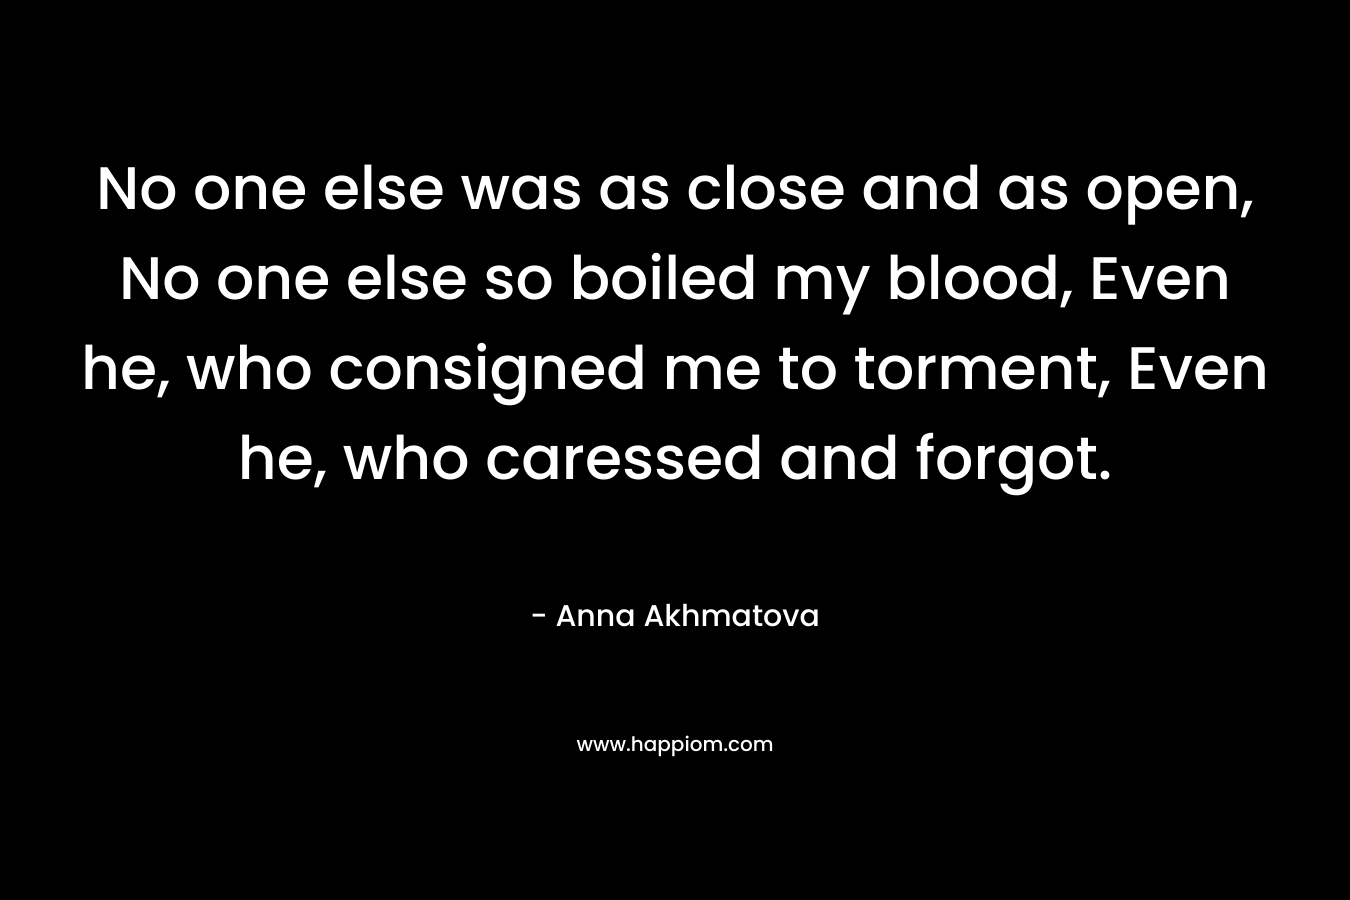 No one else was as close and as open, No one else so boiled my blood, Even he, who consigned me to torment, Even he, who caressed and forgot. – Anna Akhmatova